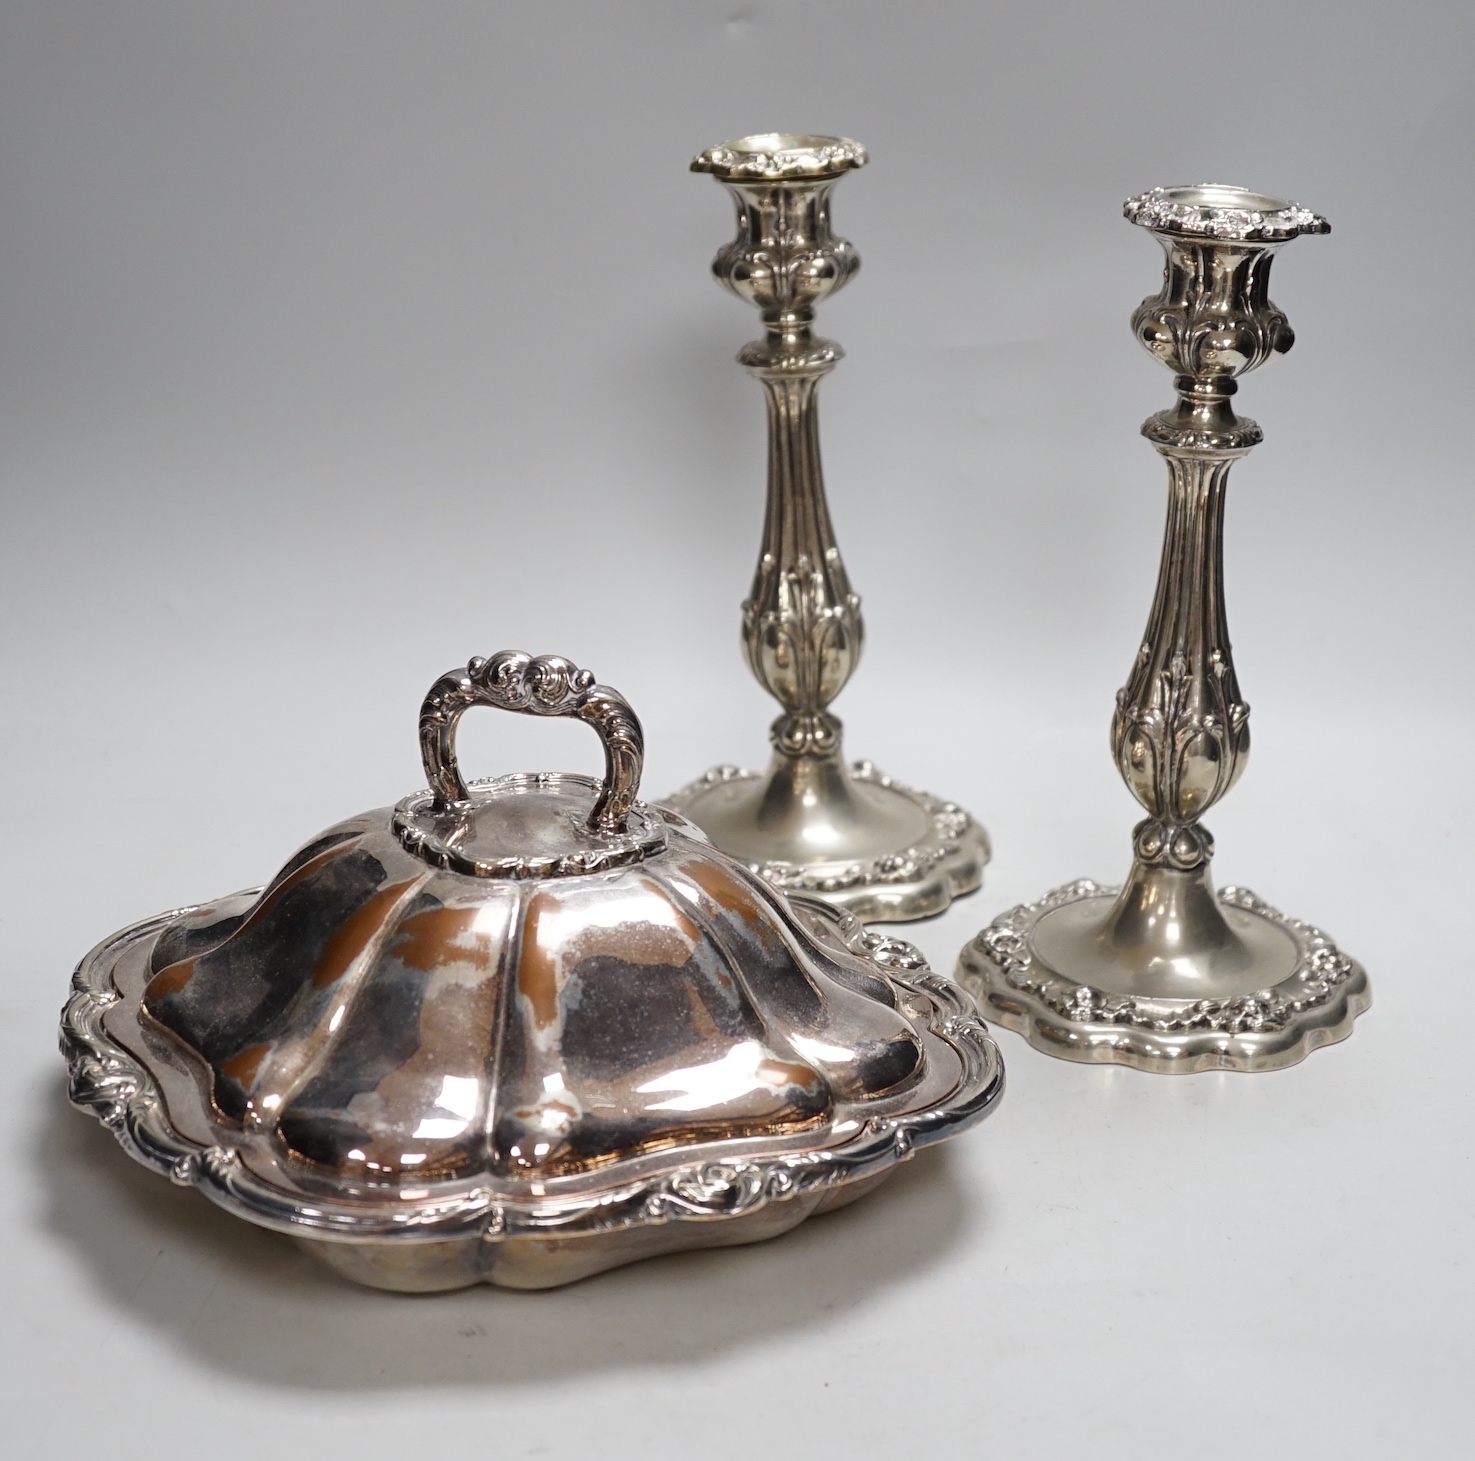 Three plated entree dishes and covers and a pair of candlesticks, candlesticks 26cm high